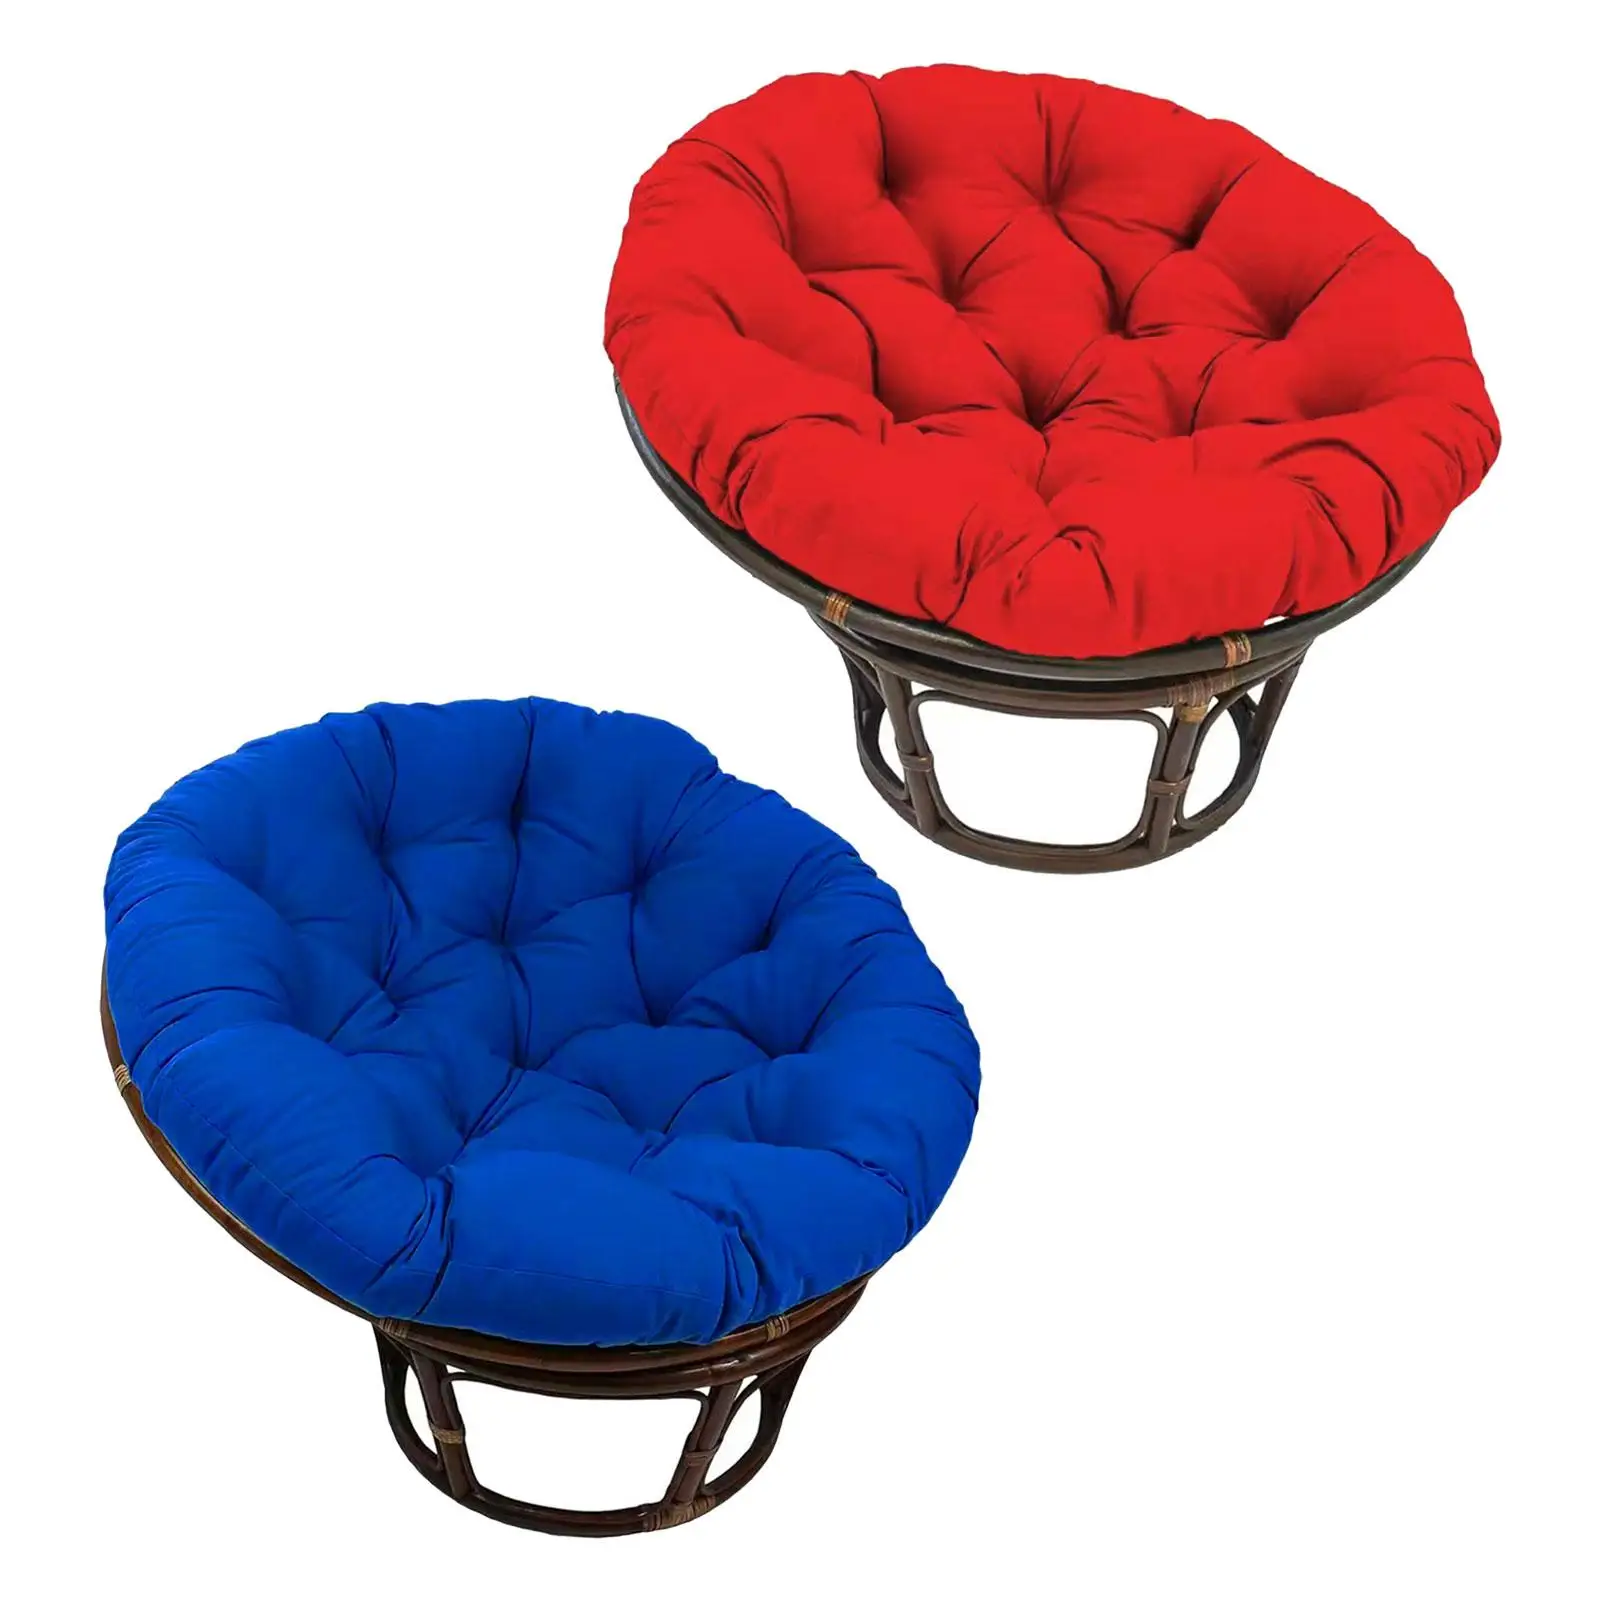 Porch Swings Chair Cushion Thickened Overstuffed Round Cushion Hanging Basket Chair Cushion for Garden Offices Hanging Baskets